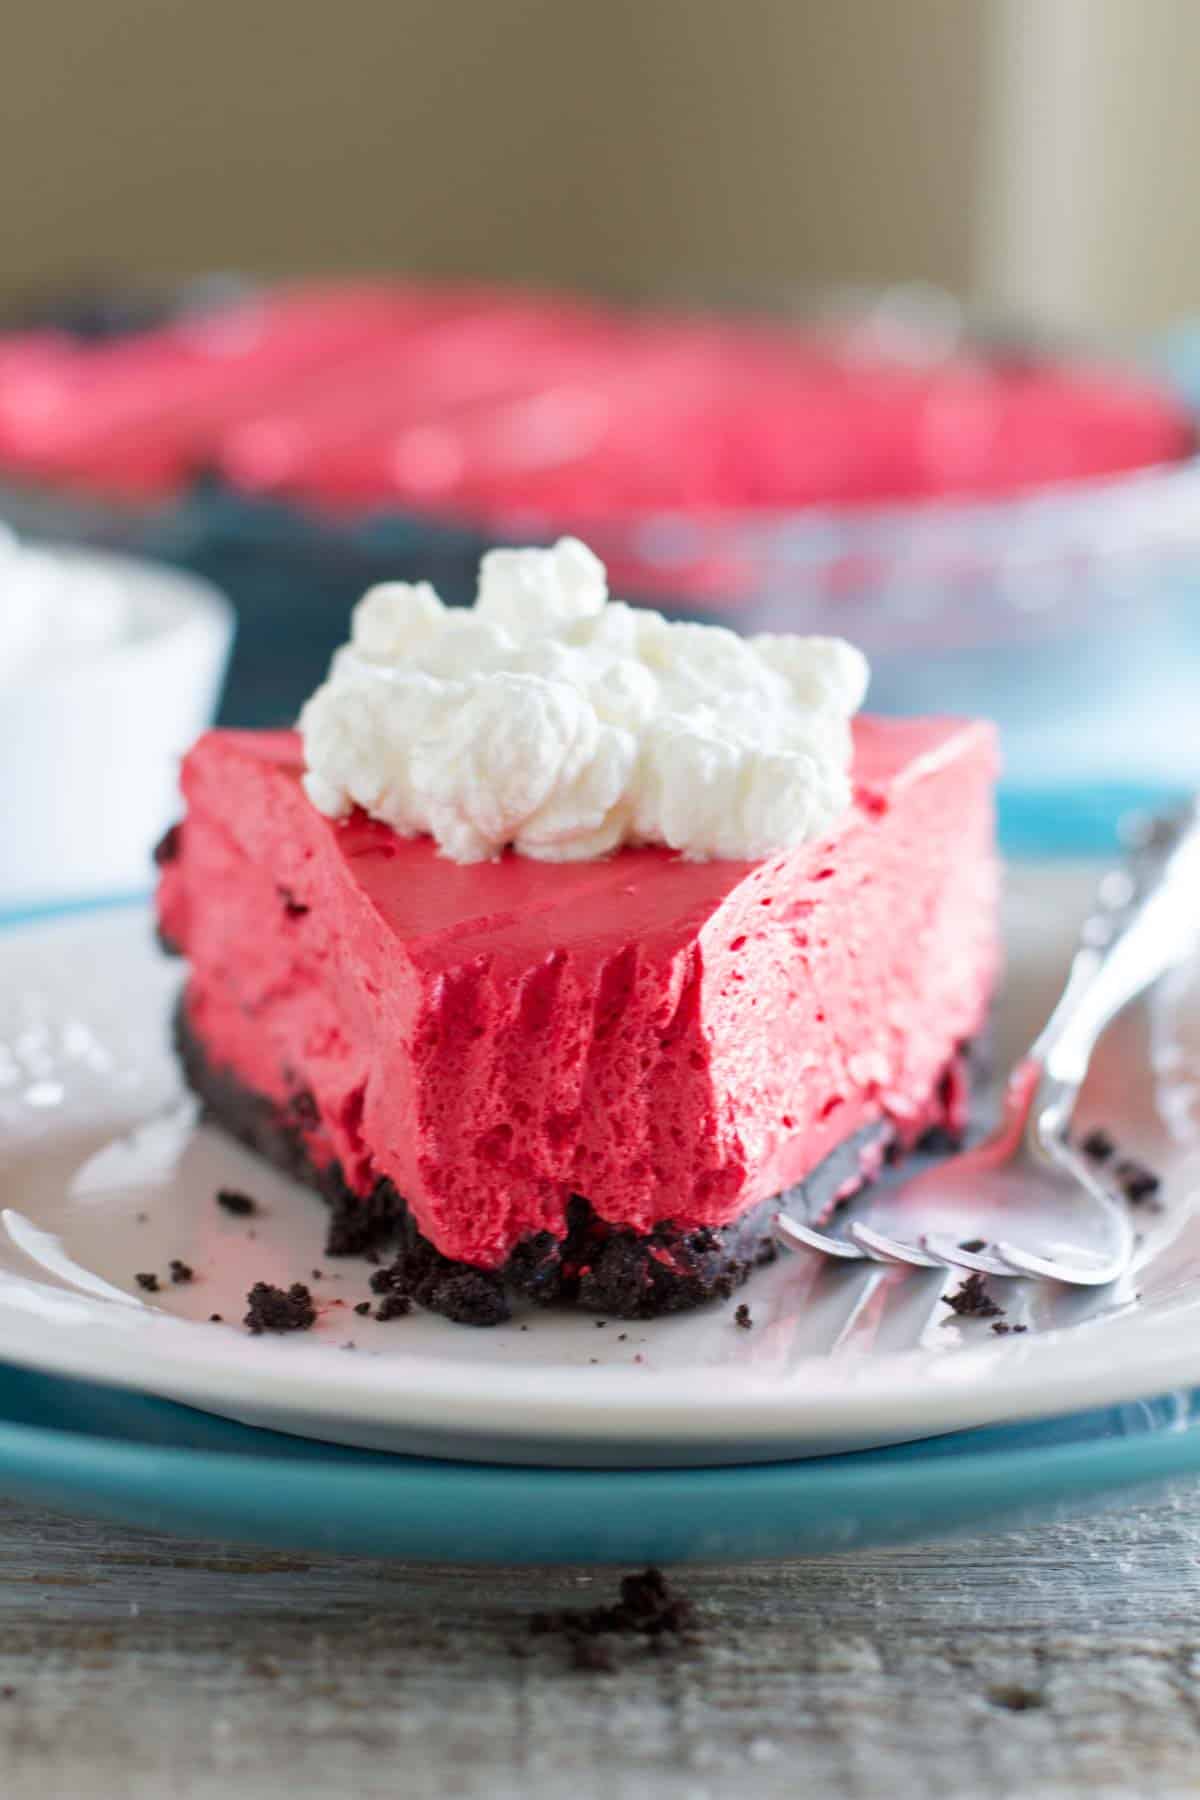 Slice of no bake red velvet cheesecake with a bite taken from it.